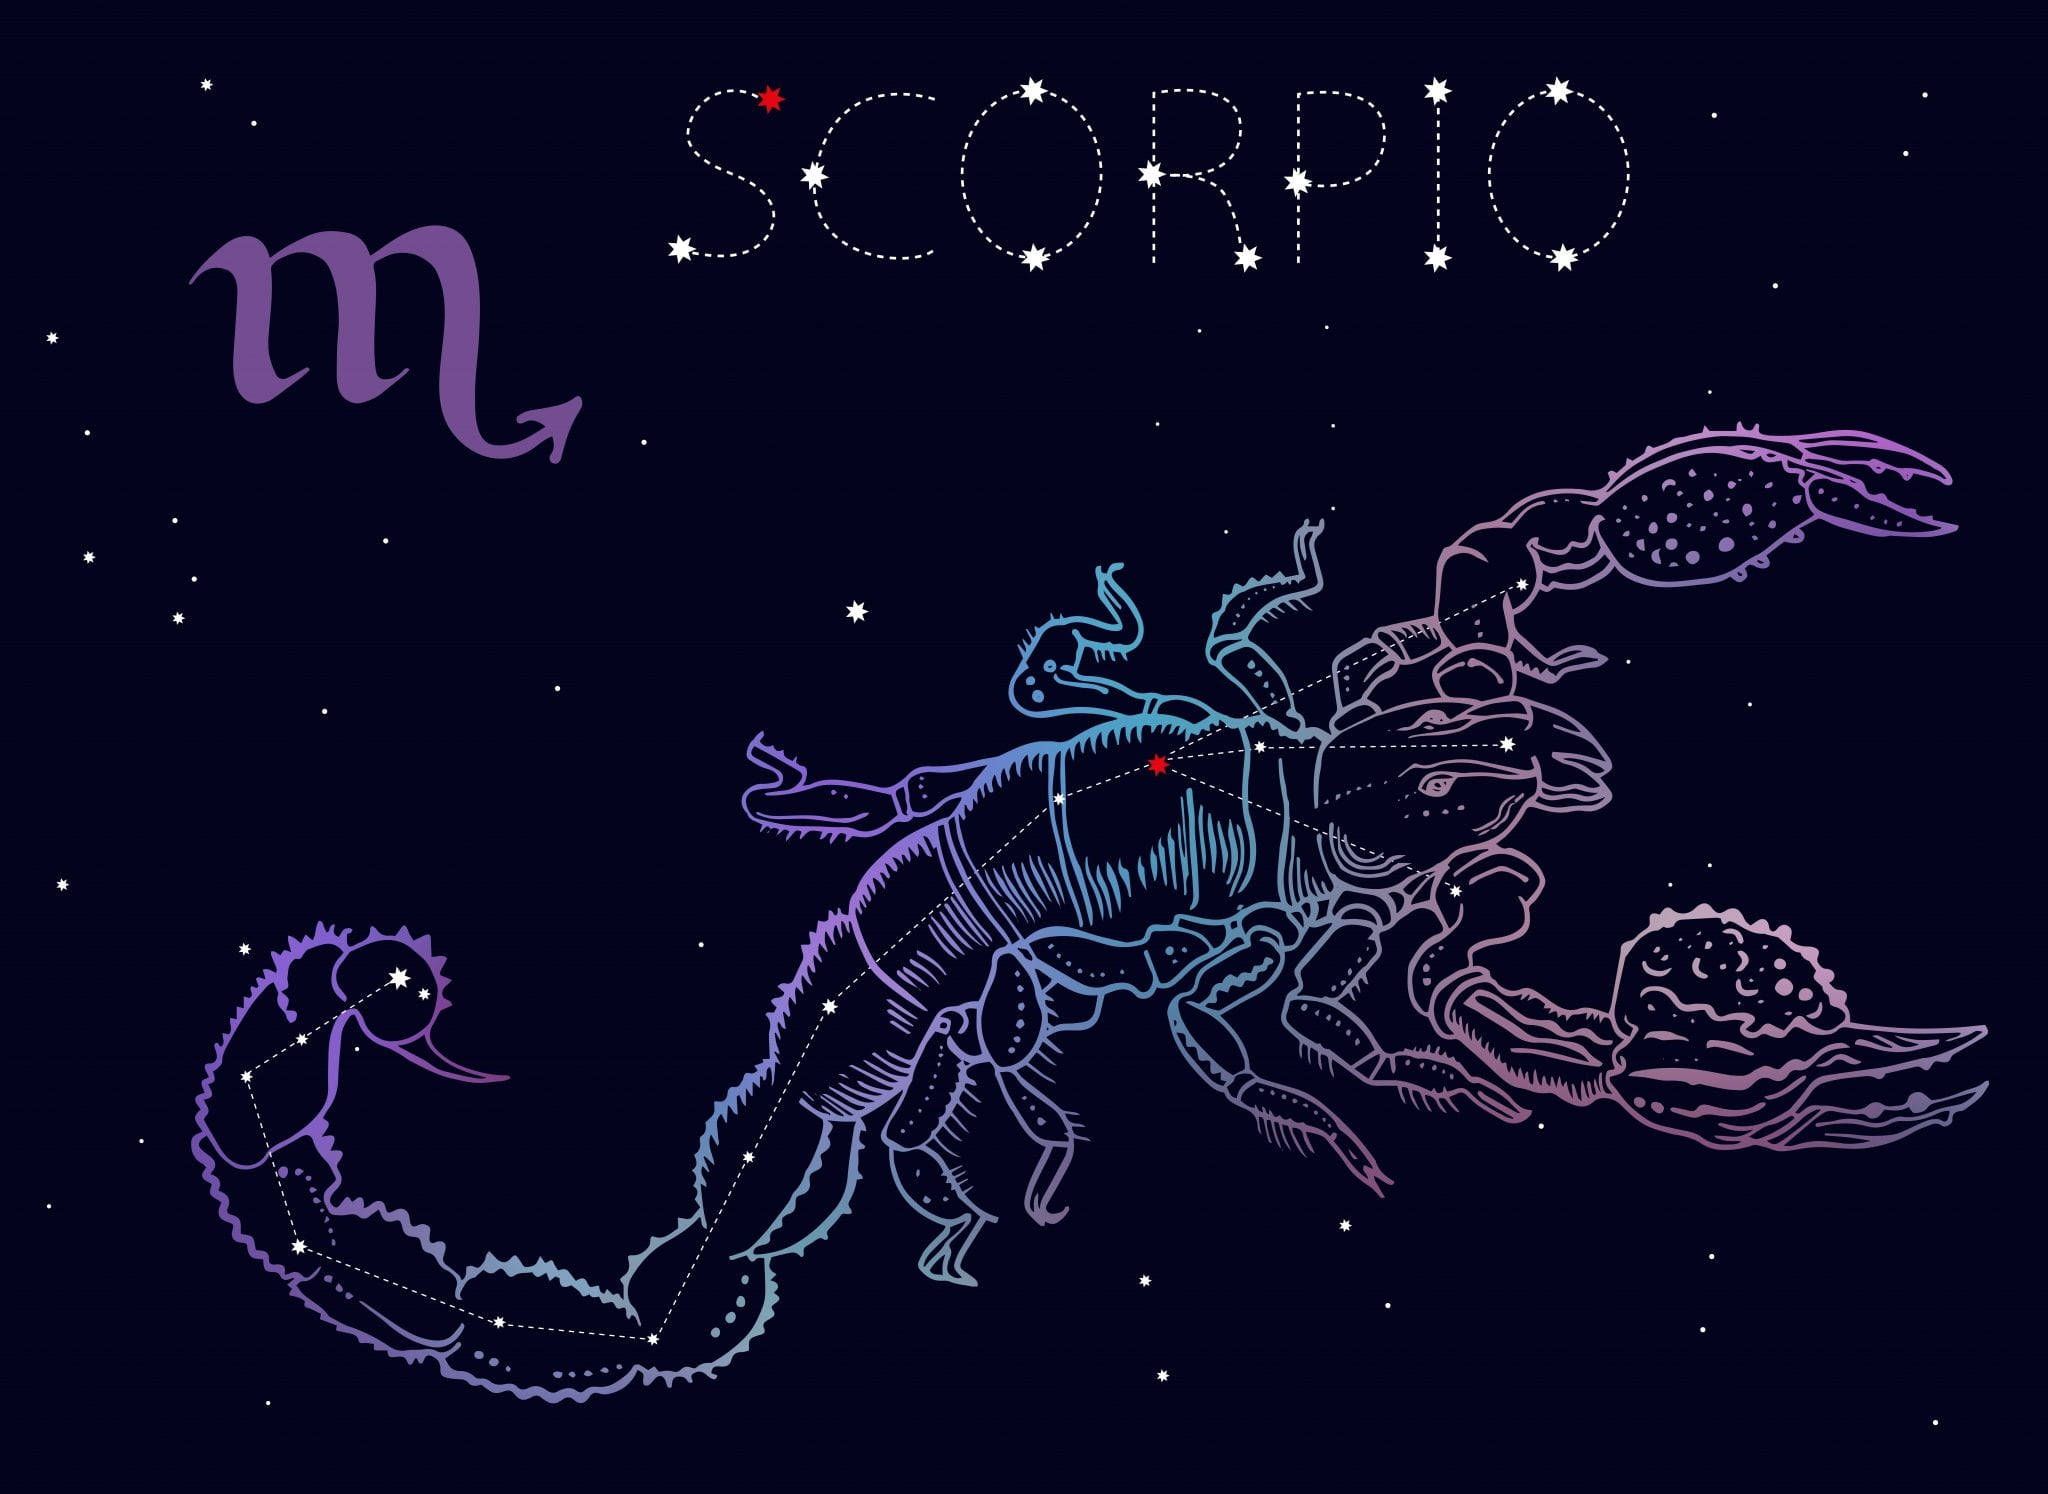 Scorpio is a water sign, represented by the scorpion. - Scorpio